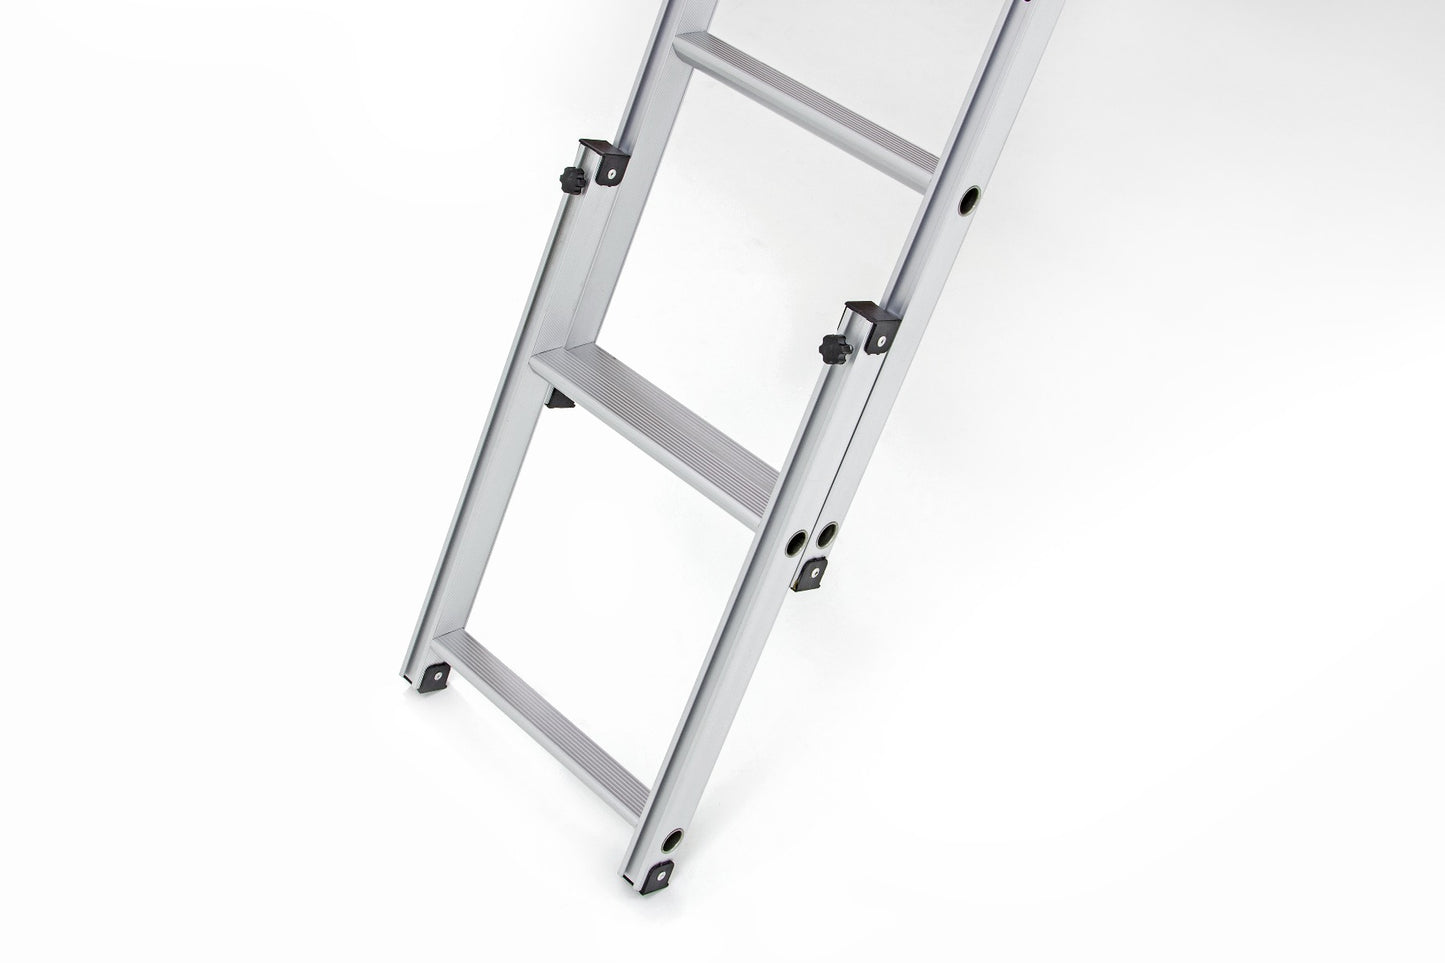 Rough Country Roof Top Tent Ladder Extension